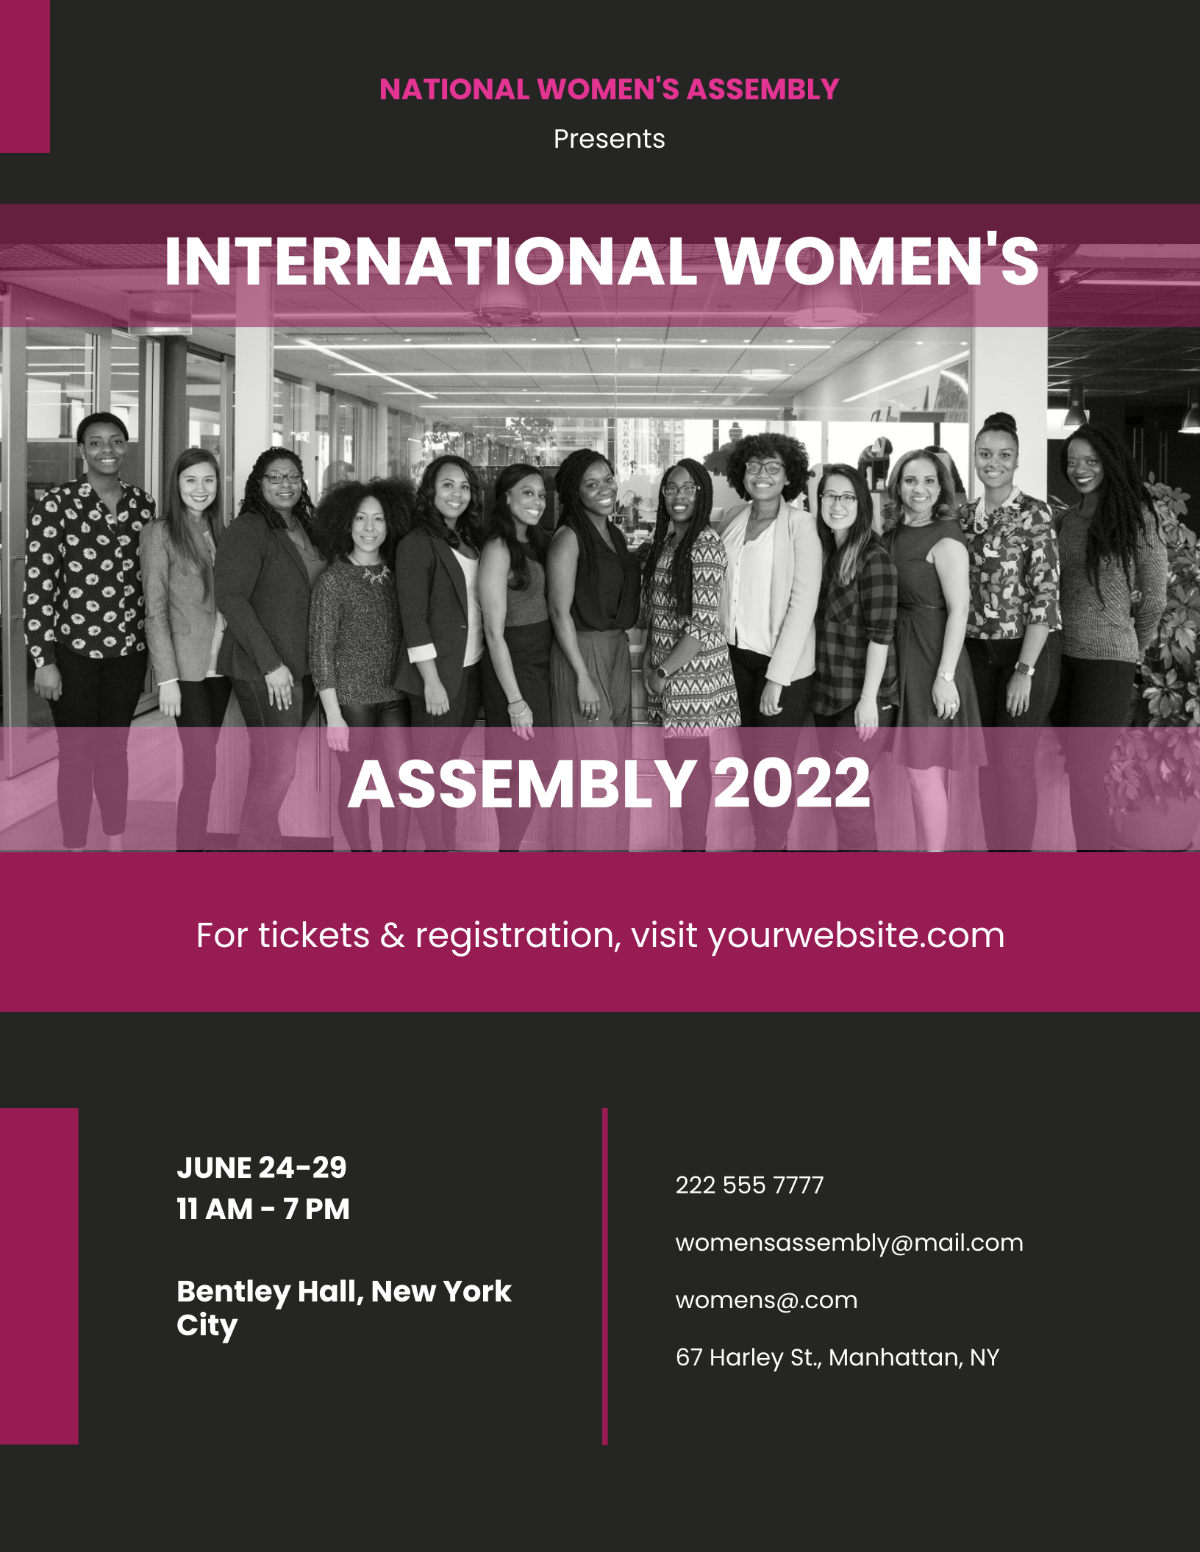 Women Conference Flyer